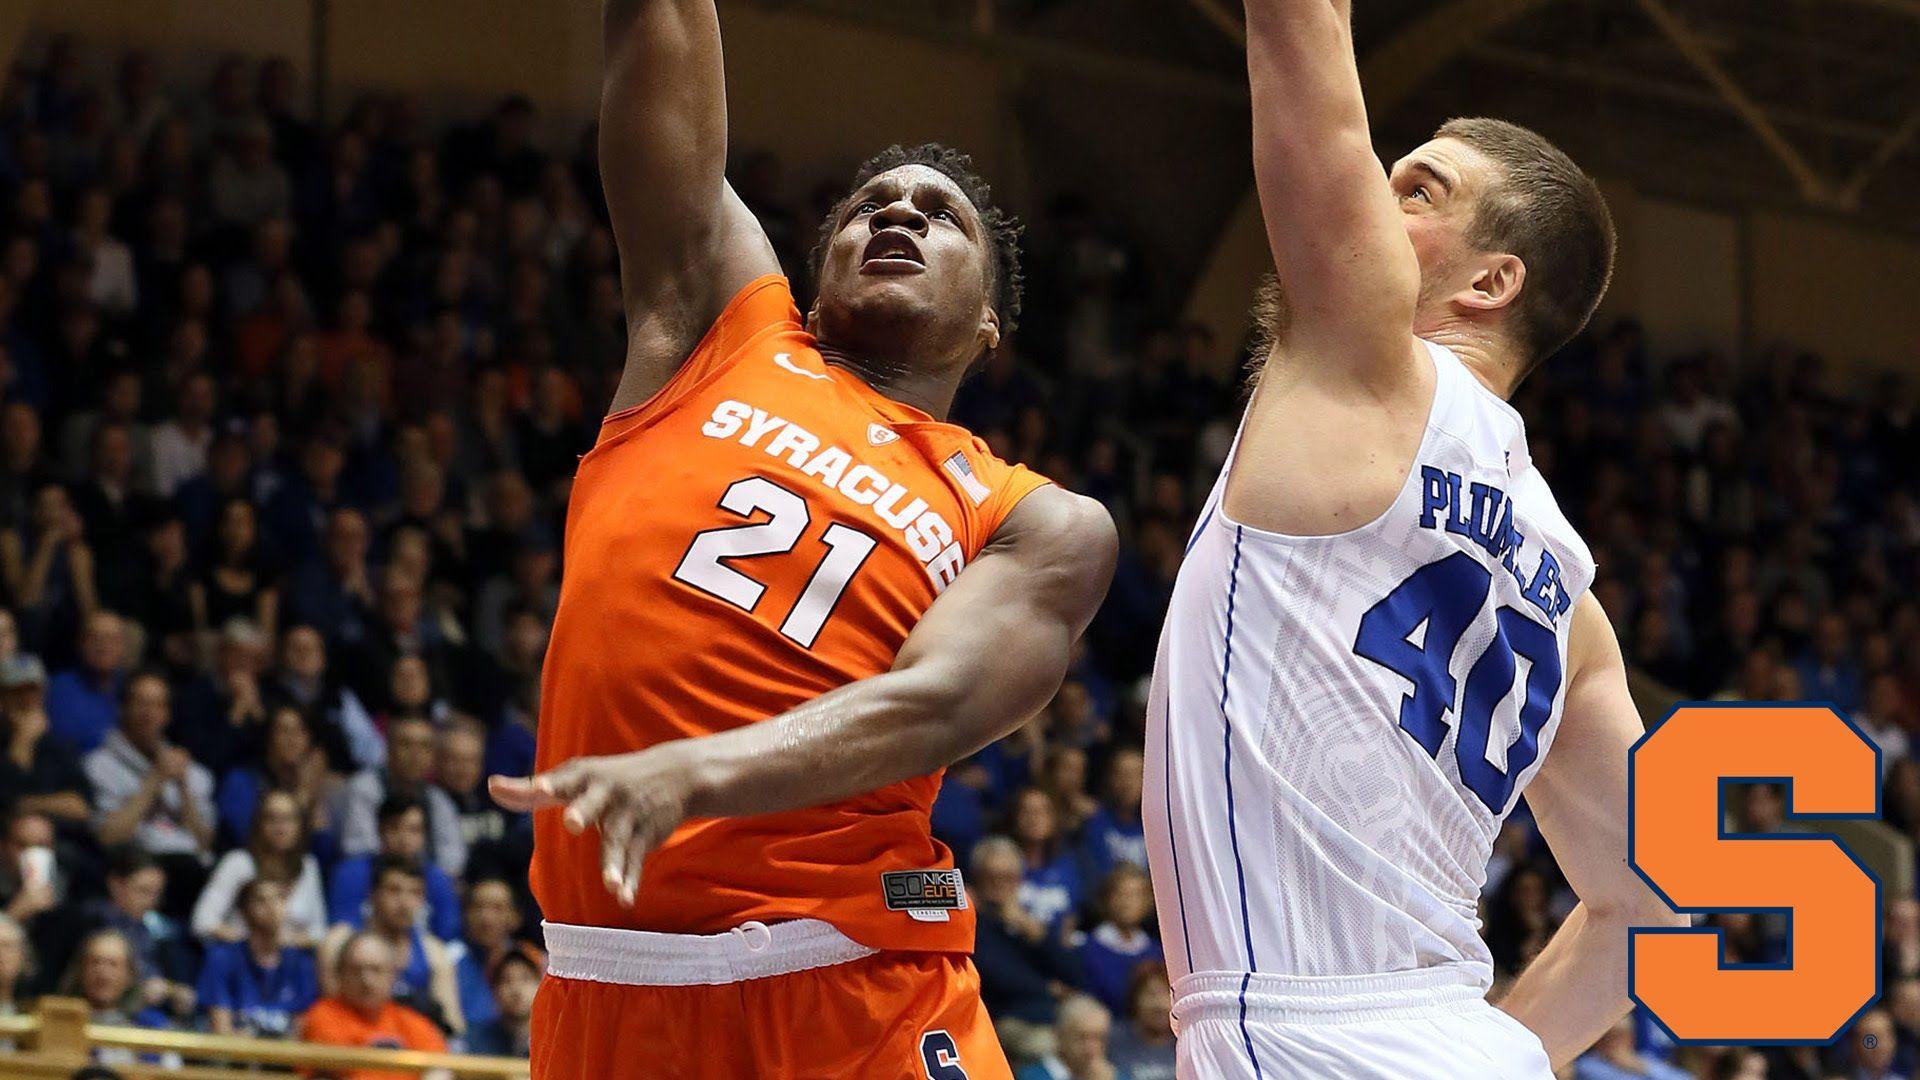 Syracuse Basketball: Tyler Roberson 14 Points & 20 Rebounds at